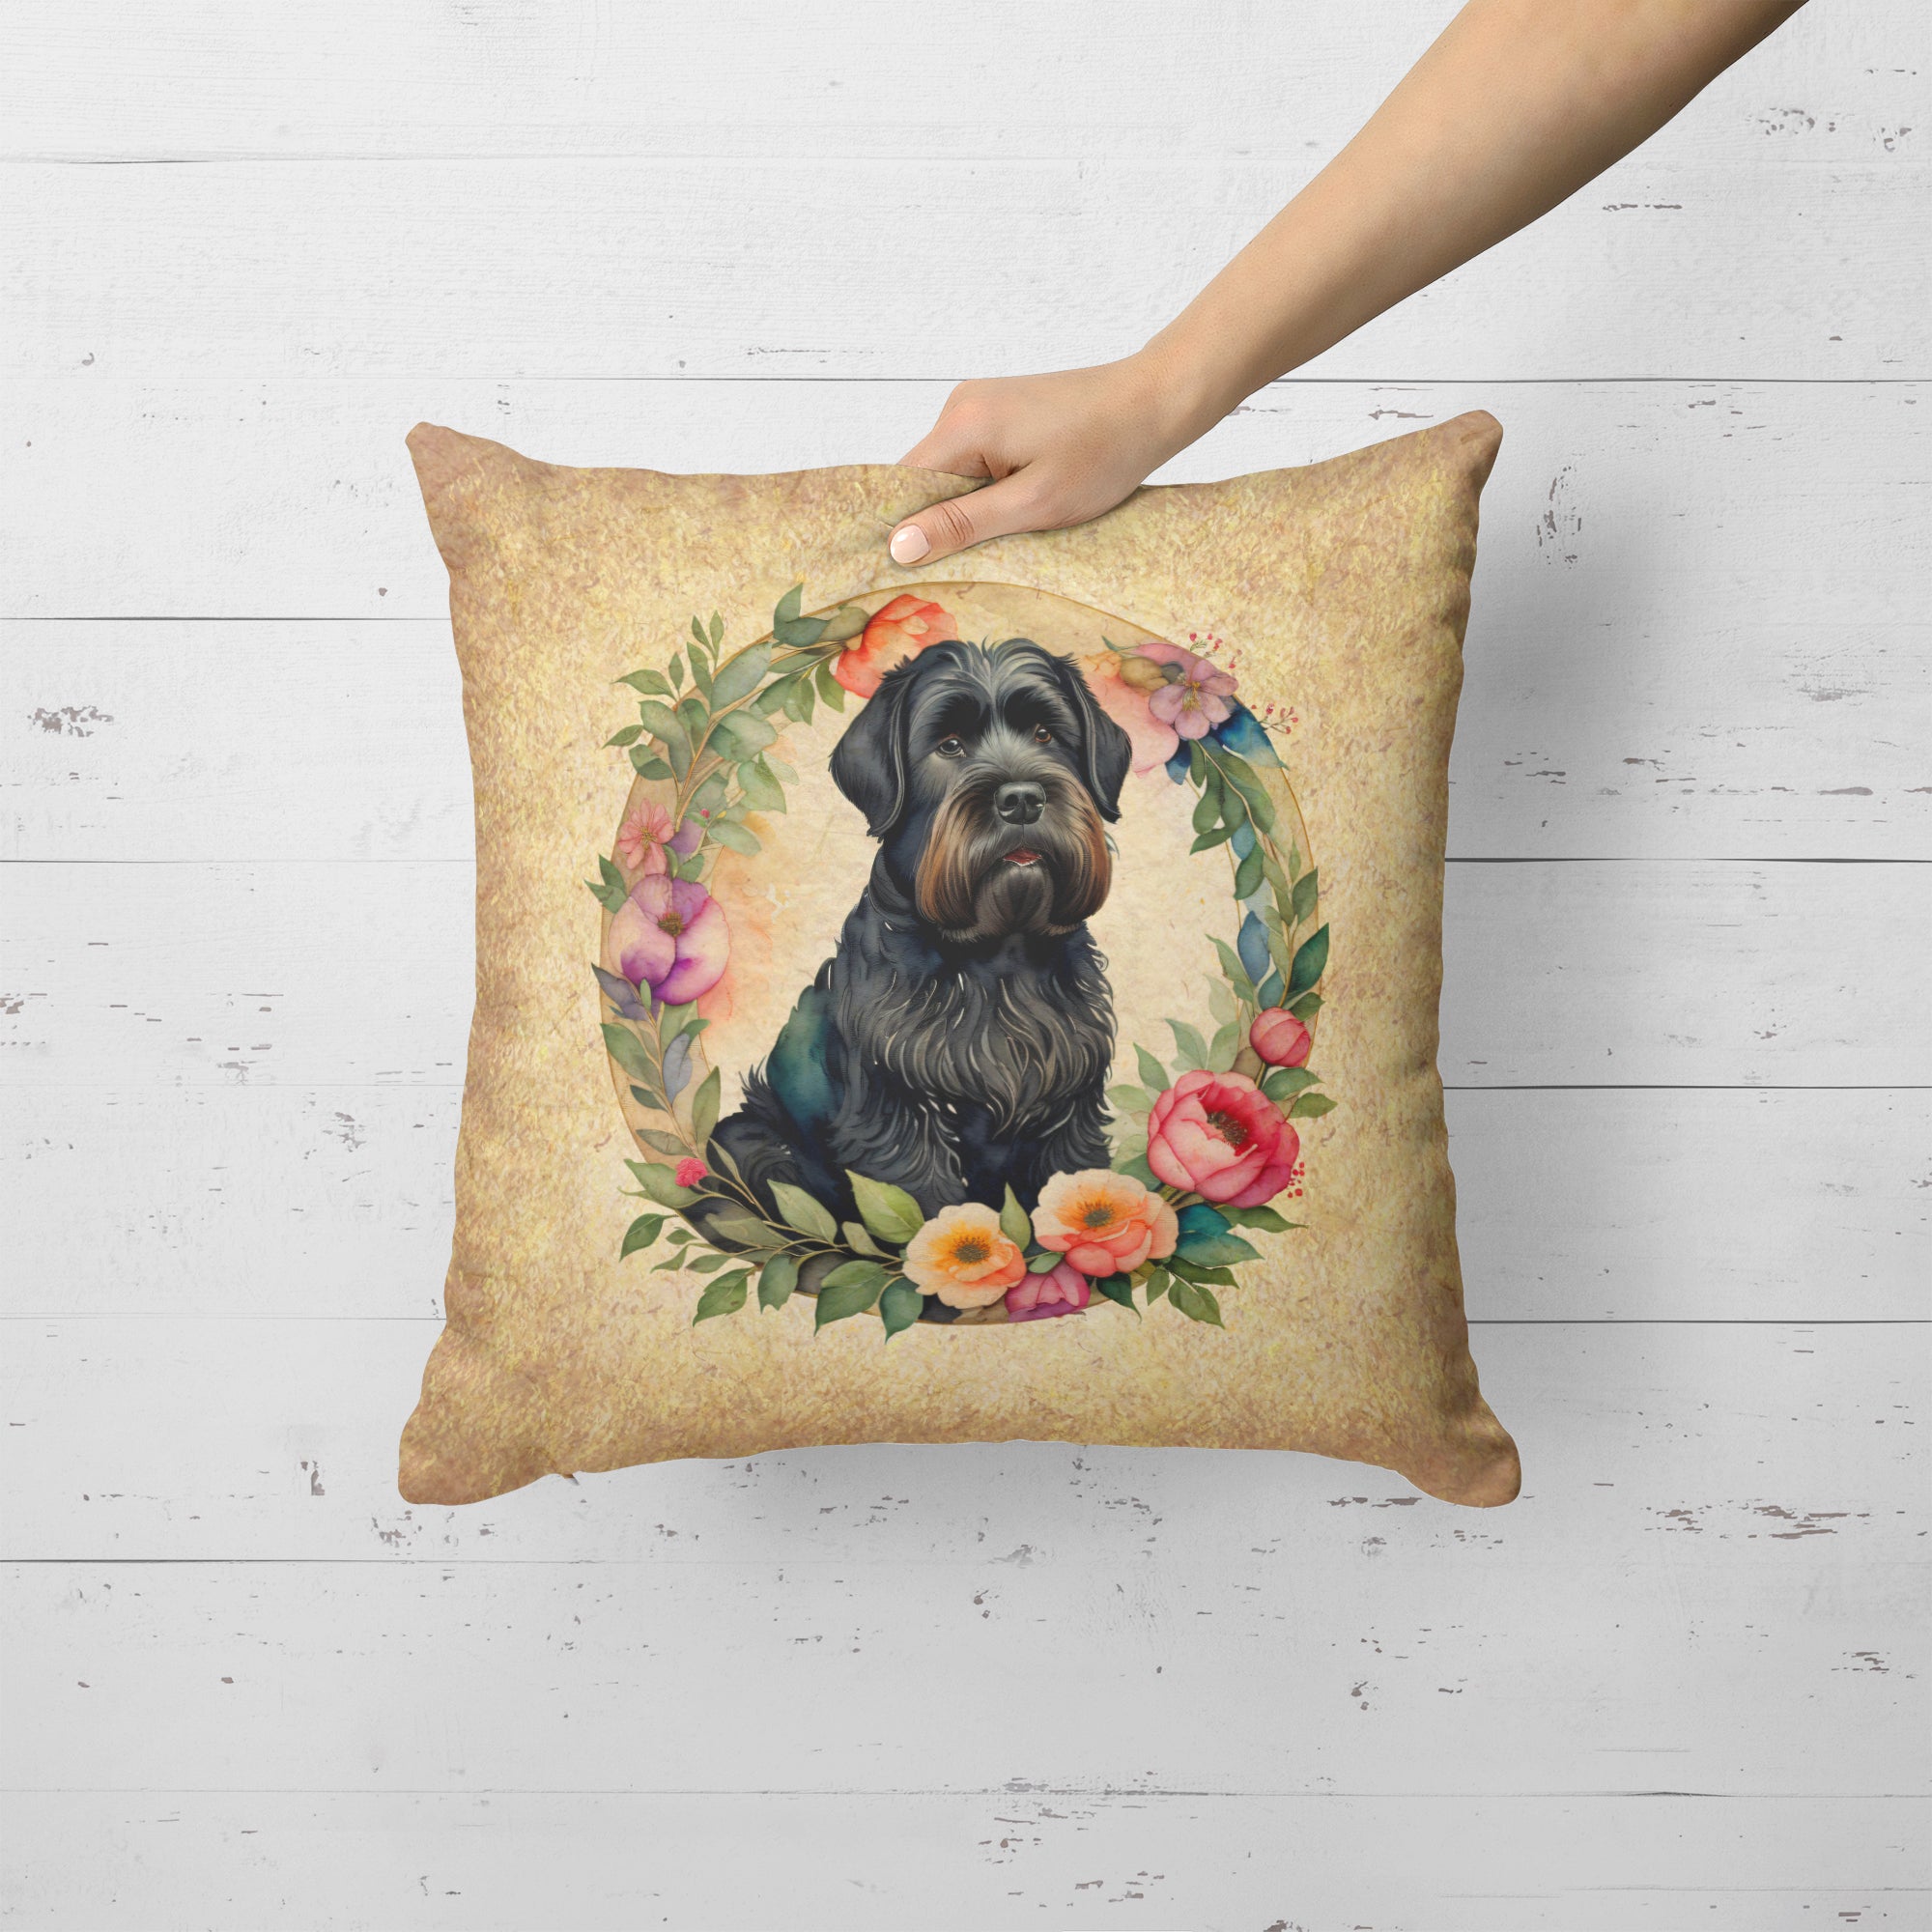 Buy this Black Russian Terrier and Flowers Fabric Decorative Pillow